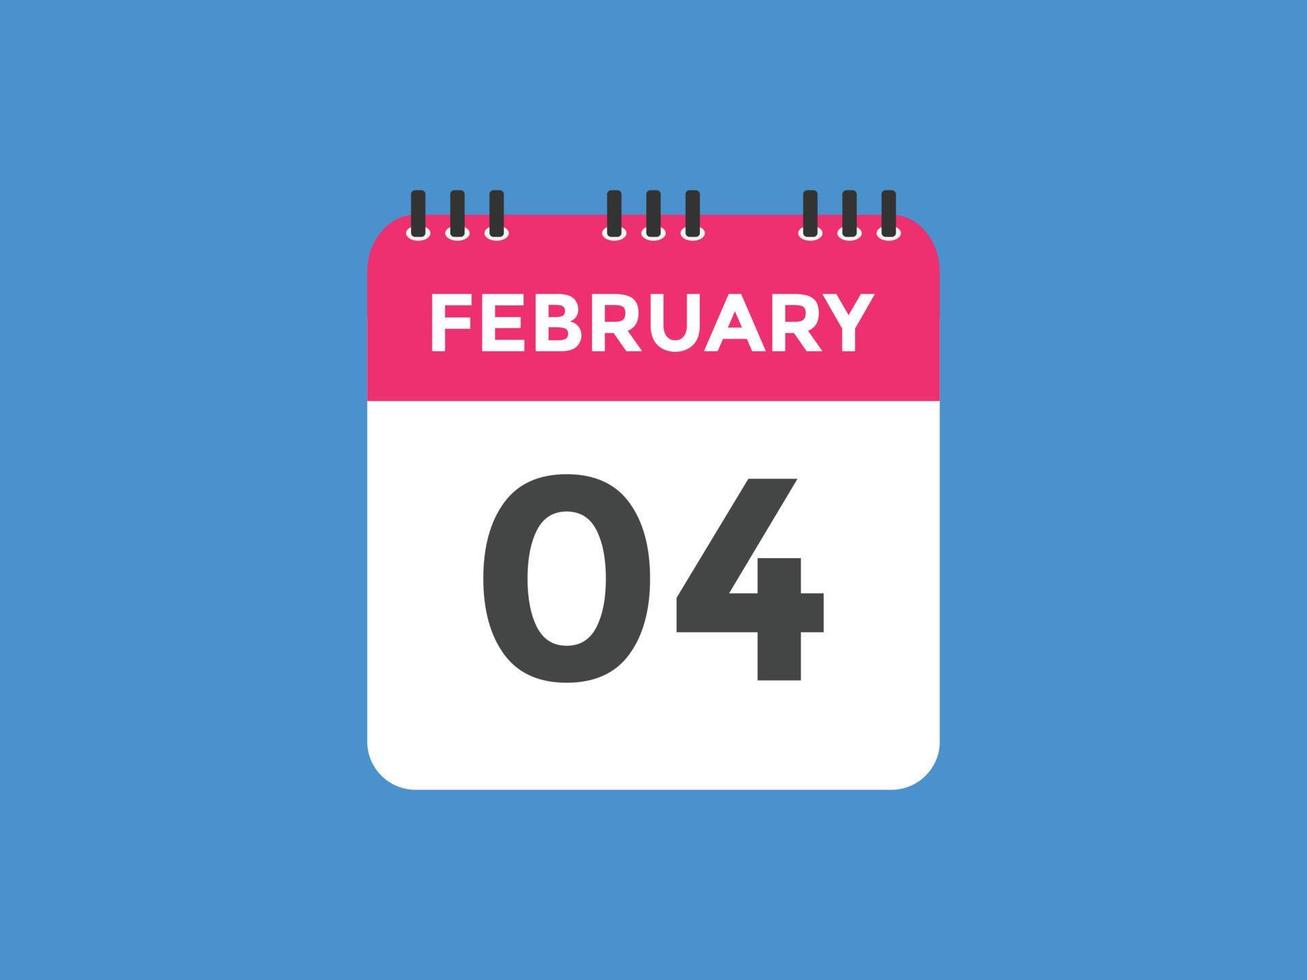 february 4 calendar reminder. 4th february daily calendar icon template. Calendar 4th february icon Design template. Vector illustration